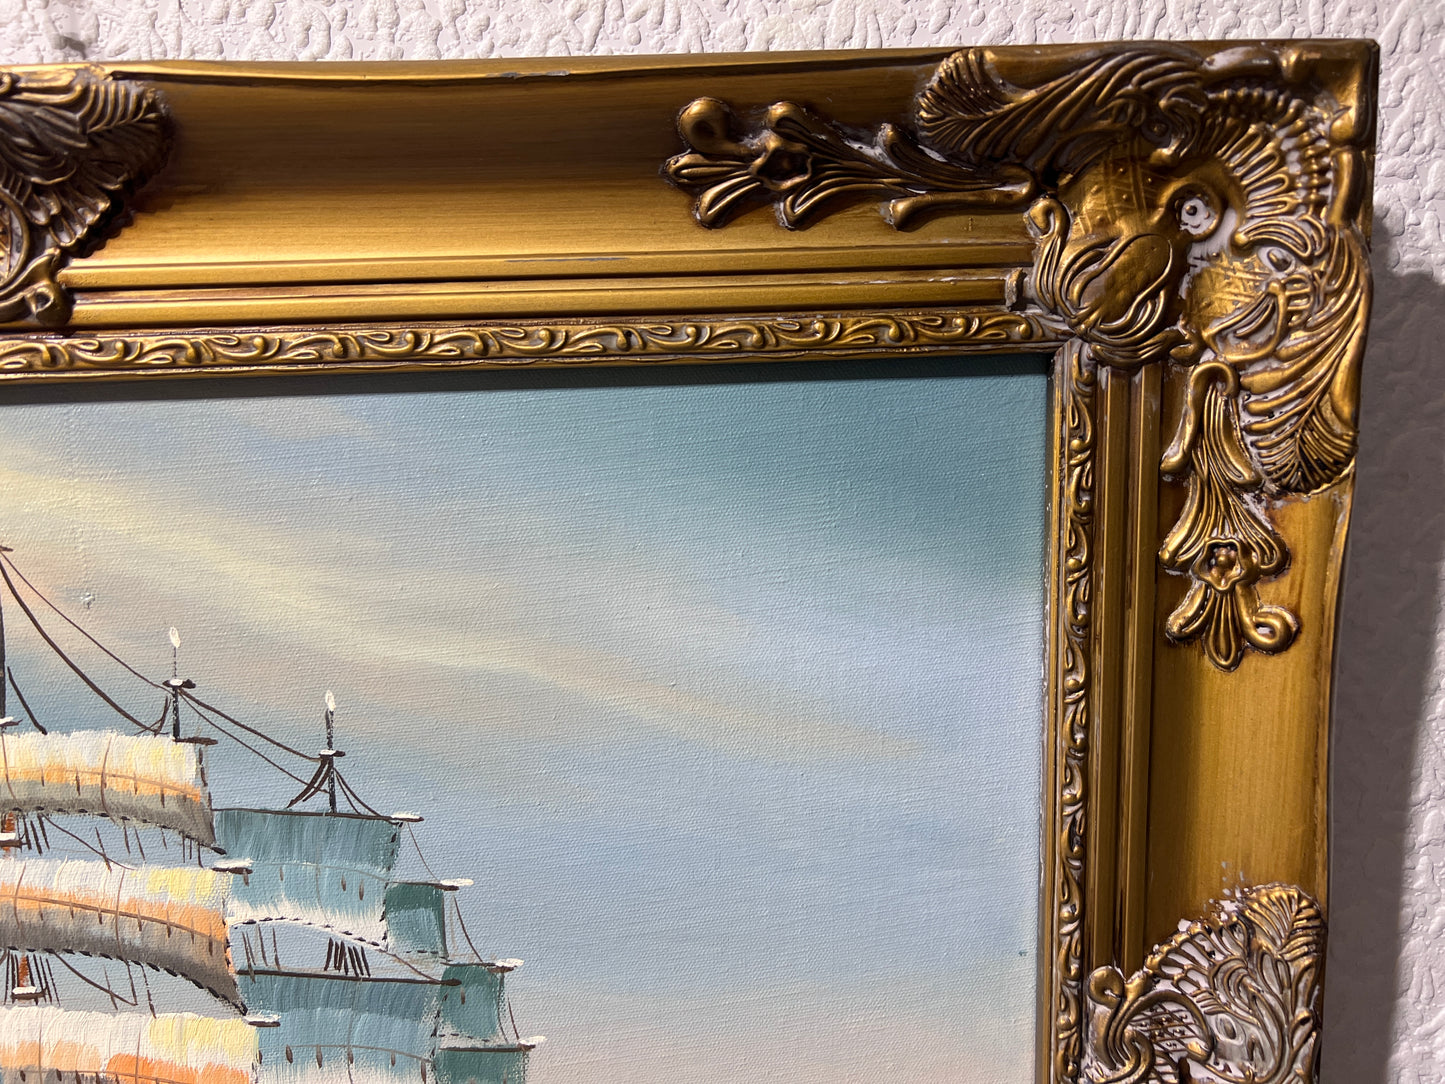 Original Oil painting on canvas, seascape, Sailing Ship, signed, Gold Frame